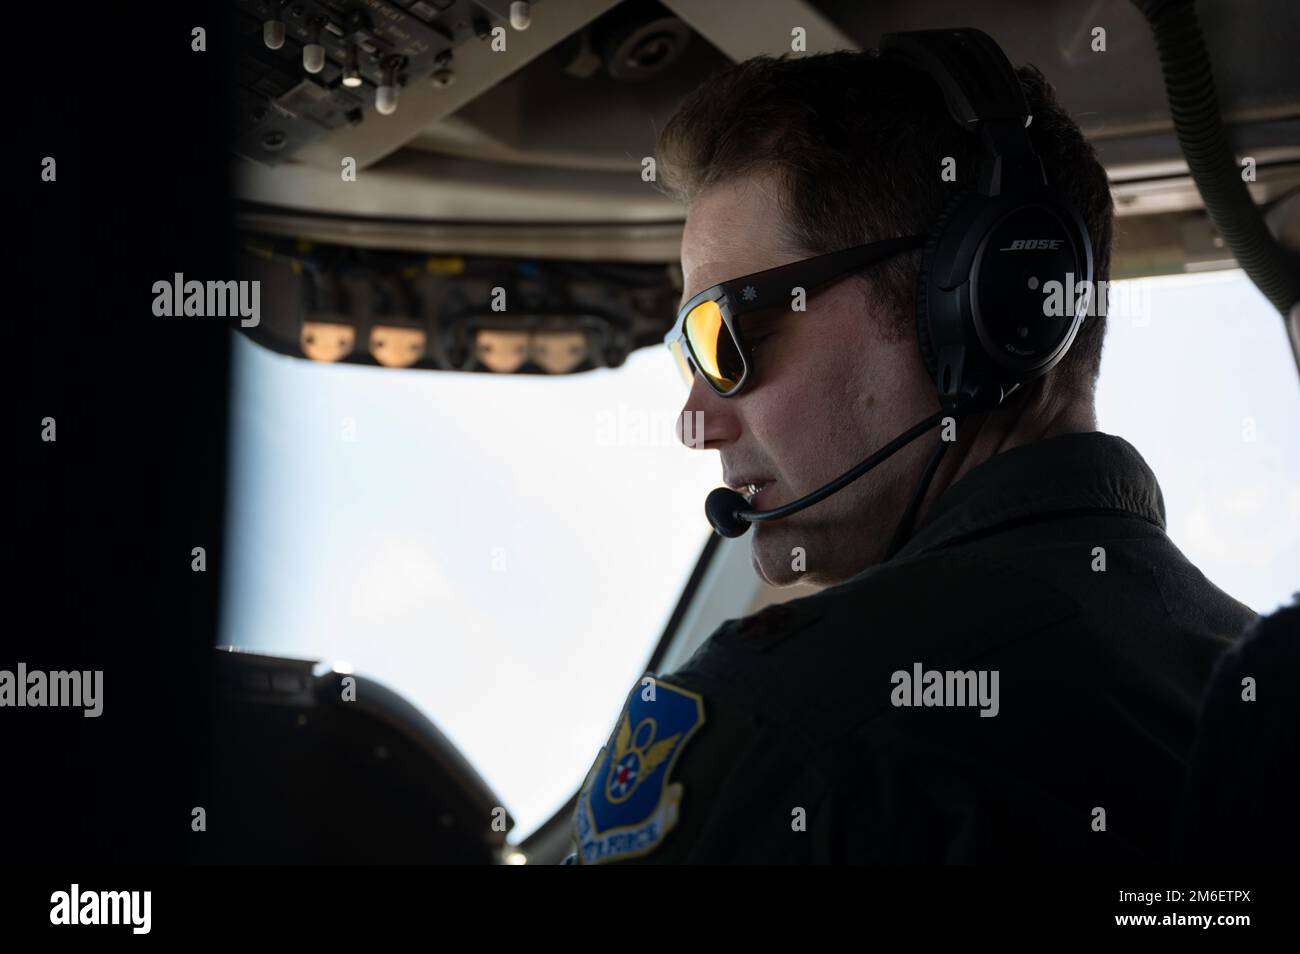 Maj. Garrett Kohl, an E-4B “Nightwatch” pilot and member of the 595th Command and Control Group, performs flying duties during a media day/orientation flight for local, trade and national media at Lincoln Airport, NE on April 26, 2022. E-4Bs are protected against the effects of electromagnetic pulse to secure internal communication systems from any external interference. Stock Photo